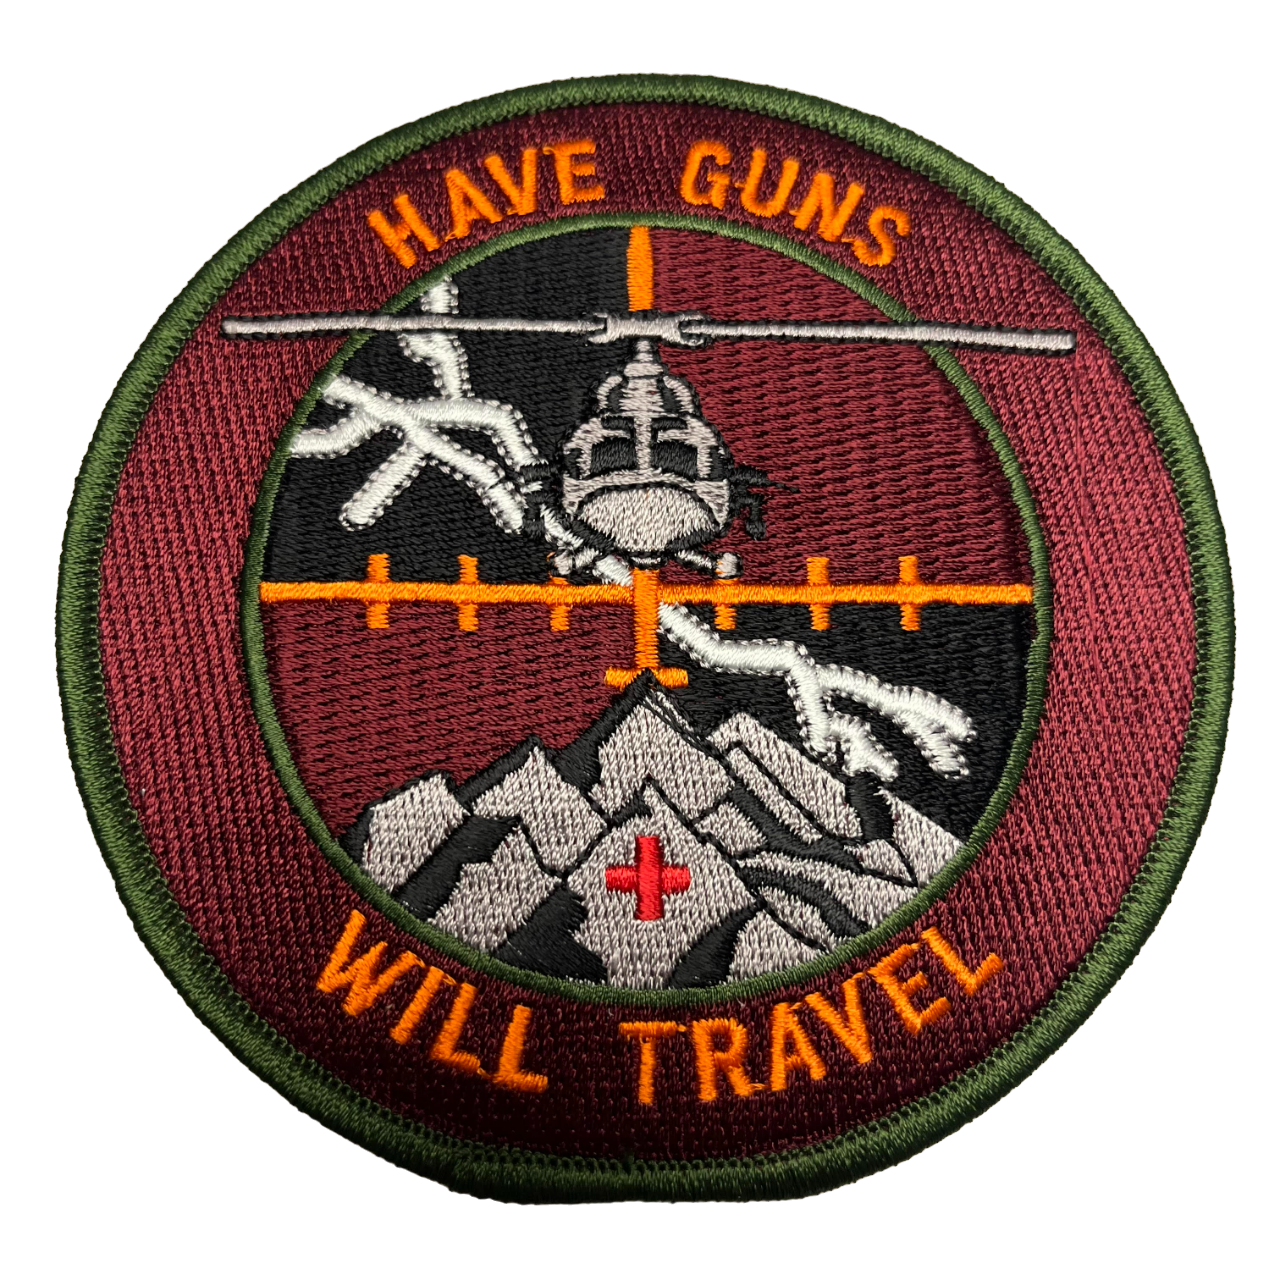 HMLA 167 Have Guns Will Travel Patch - Sew-On Patch